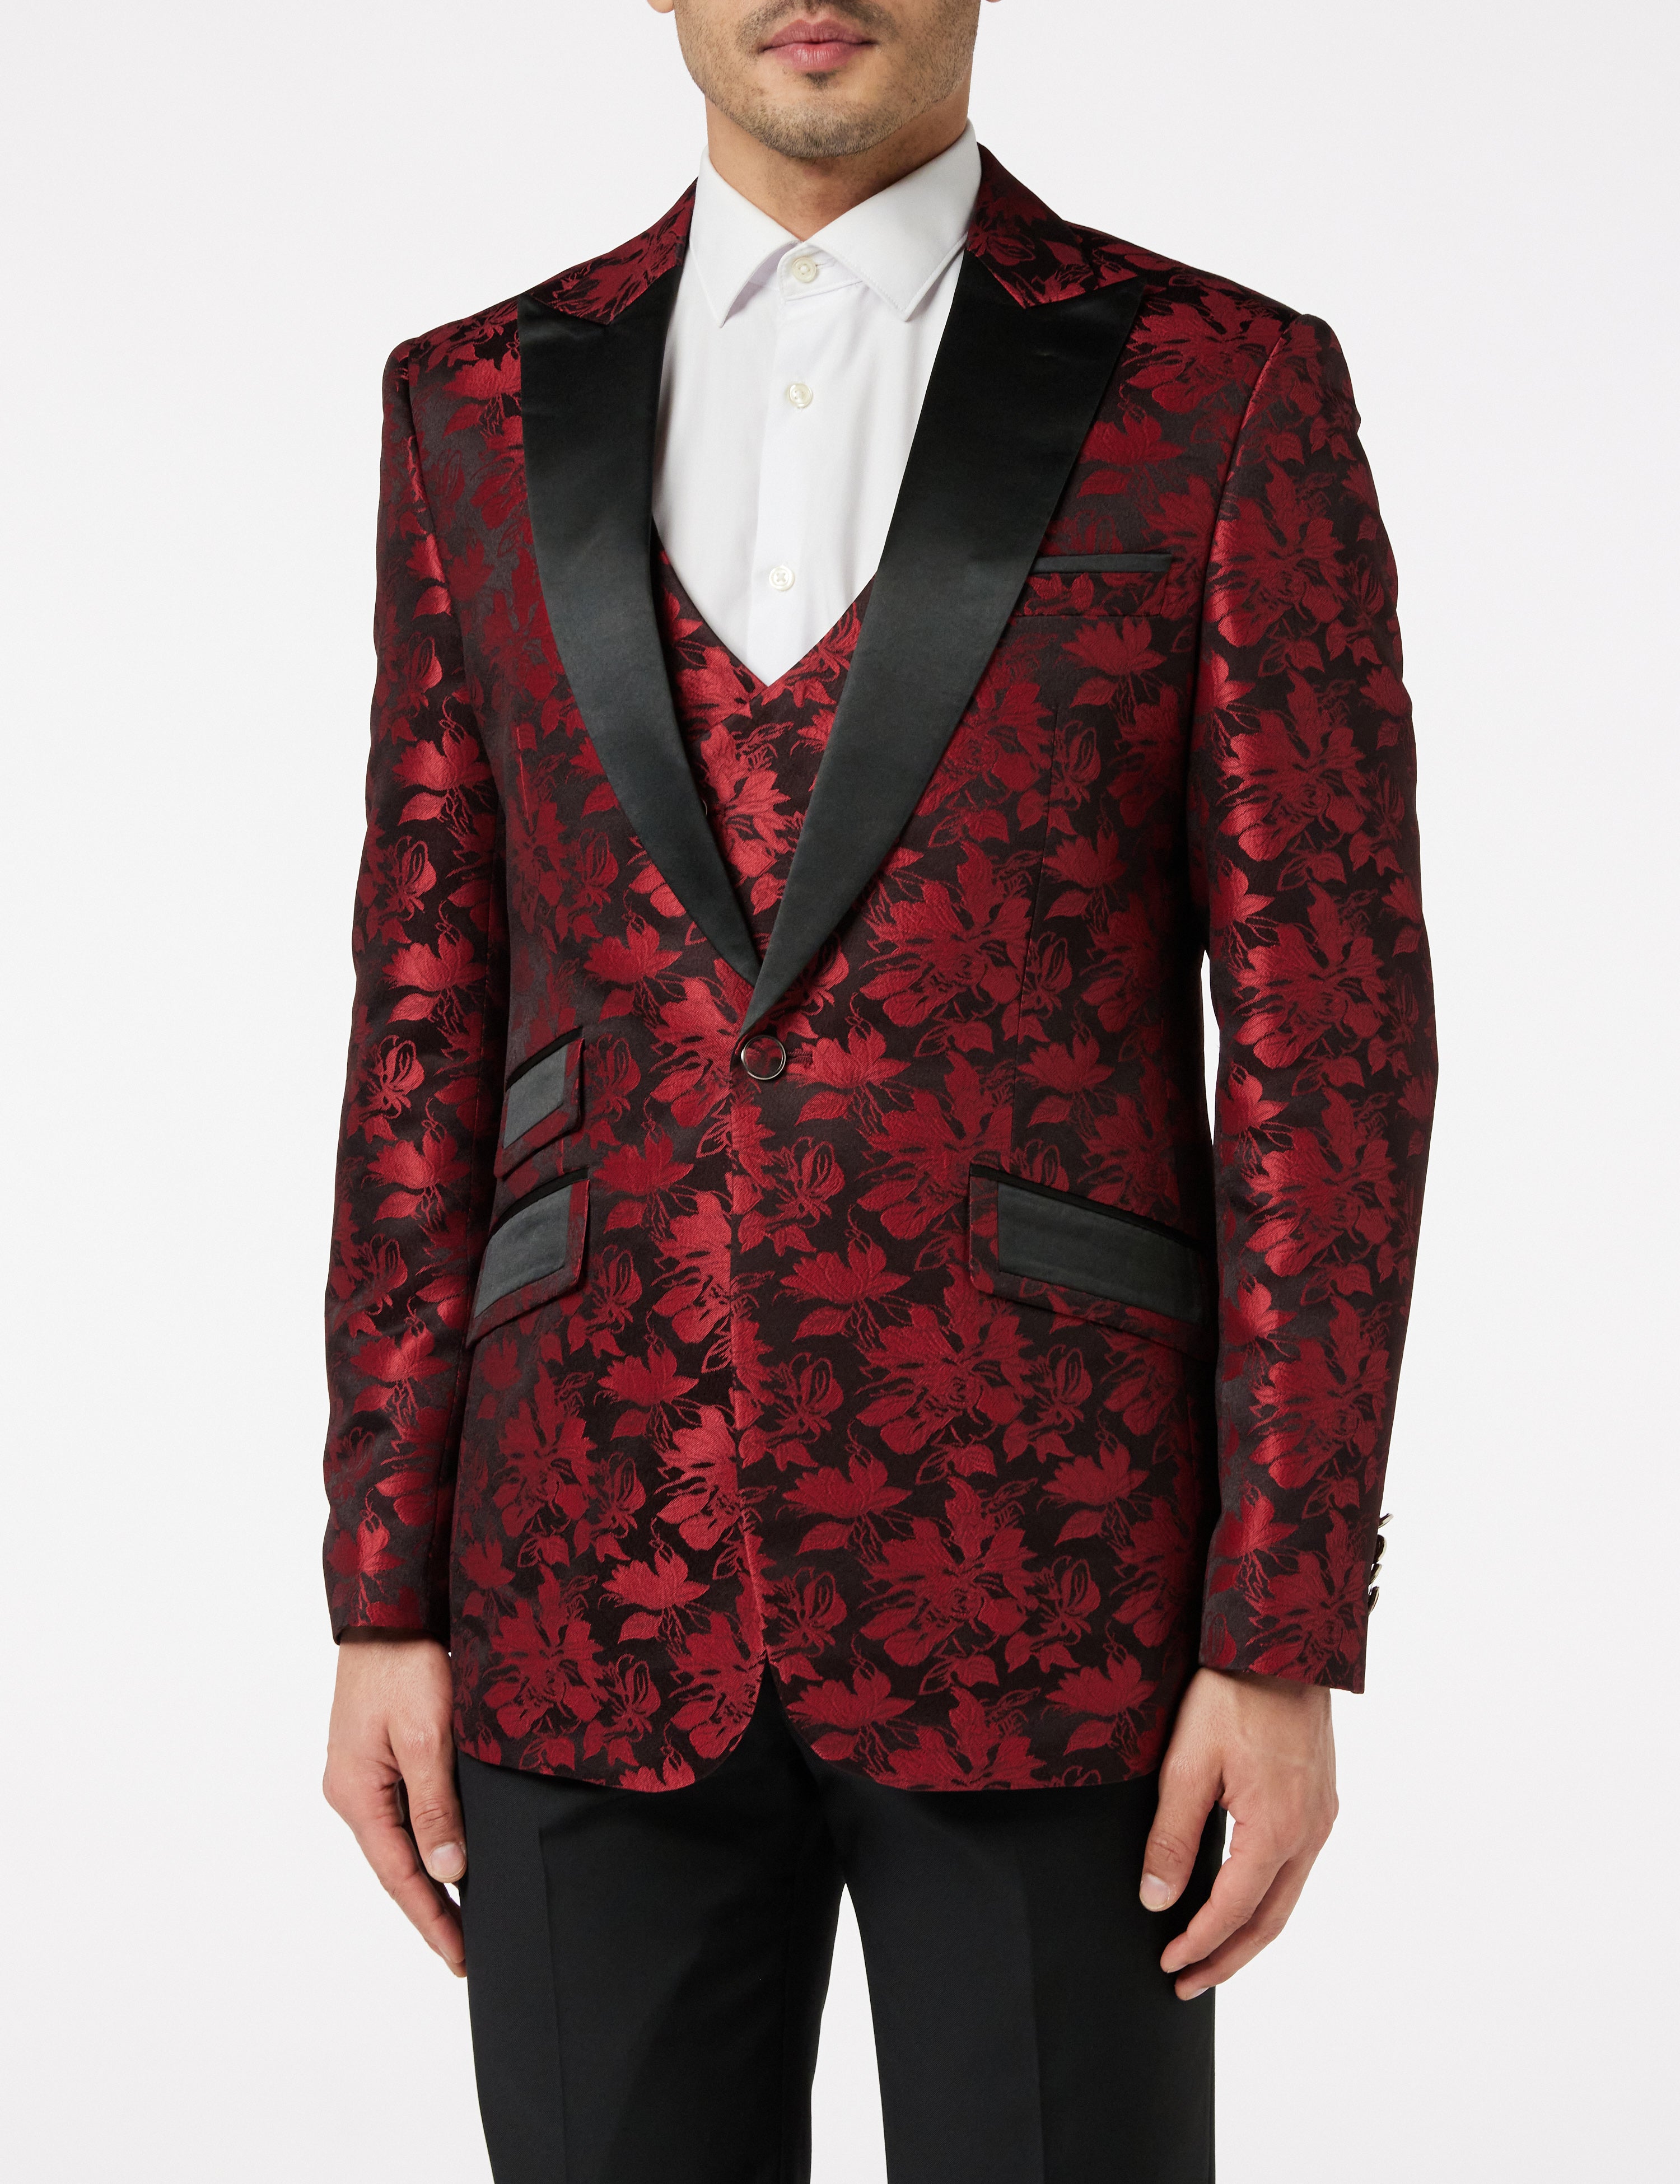 Mens Grooms 3 Piece Wedding Suit Vintage Paisley Classic Tailored Tuxedo Jacket Red